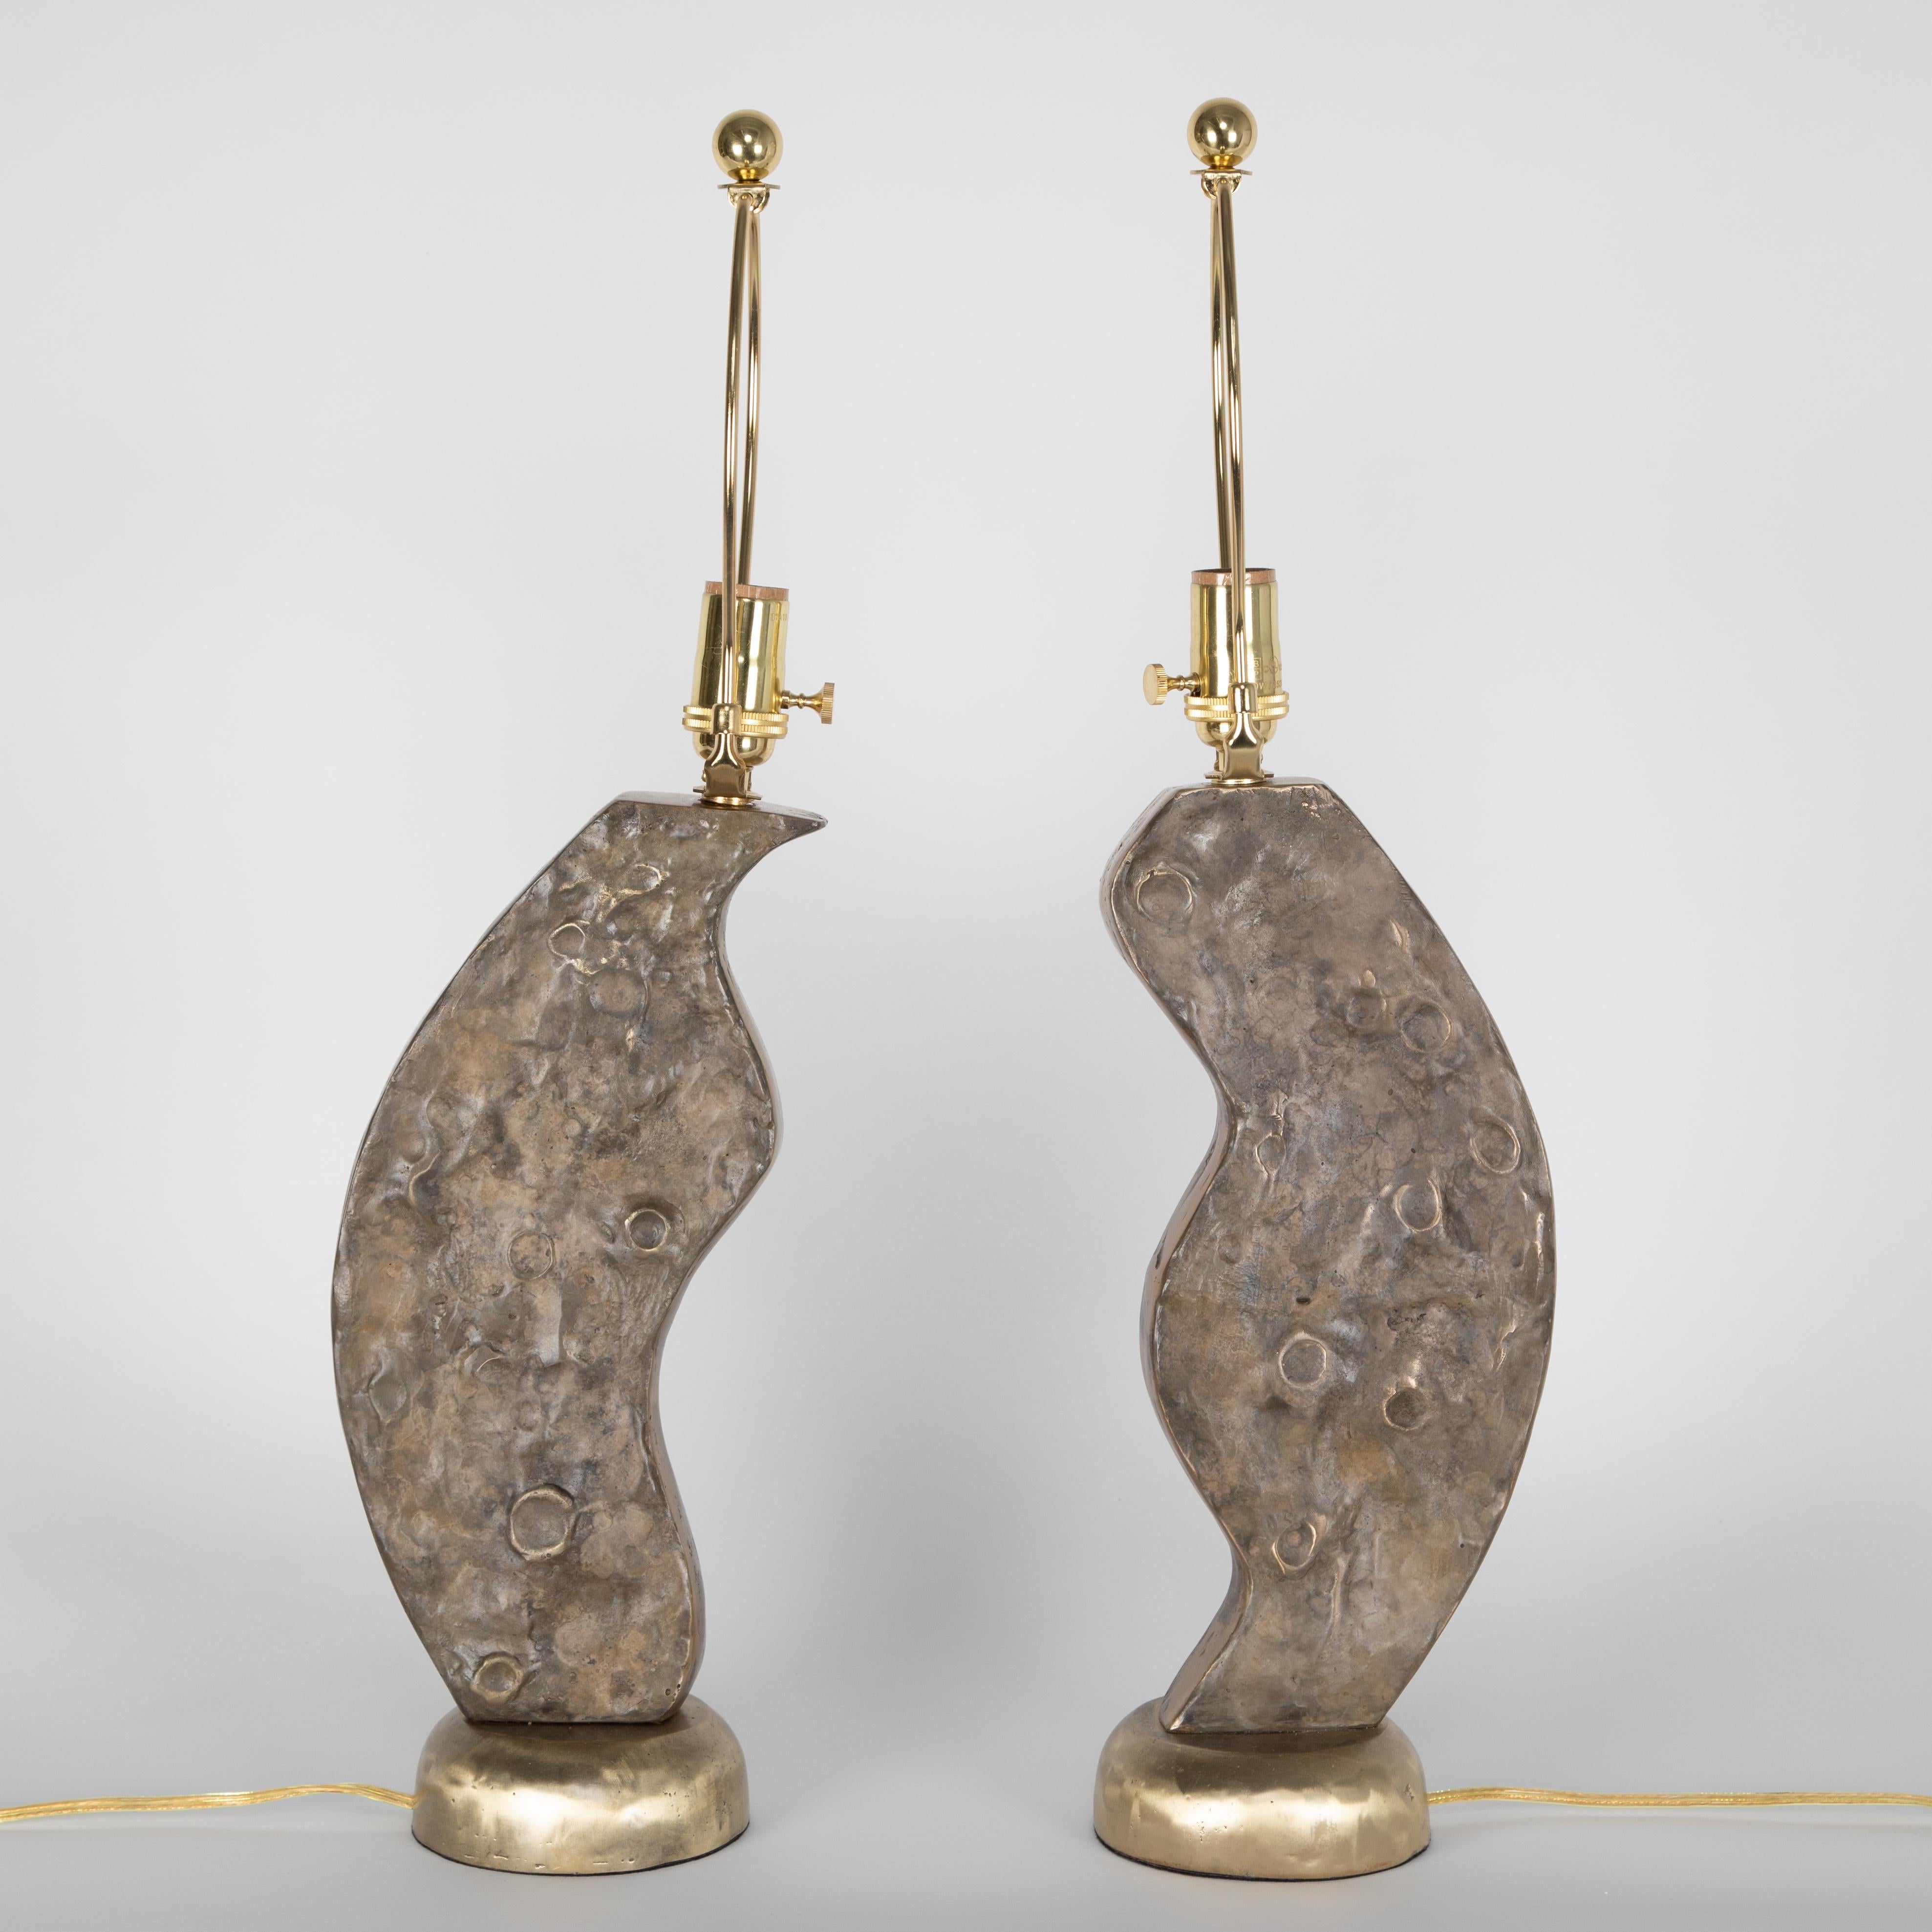 Pair of heavy Brutalist brass table lamps in complementing forms that would interlock like a puzzle if connected together. Fronts and backs are textured with crater-like details, and the sides and circular bases feature a shinier finish.